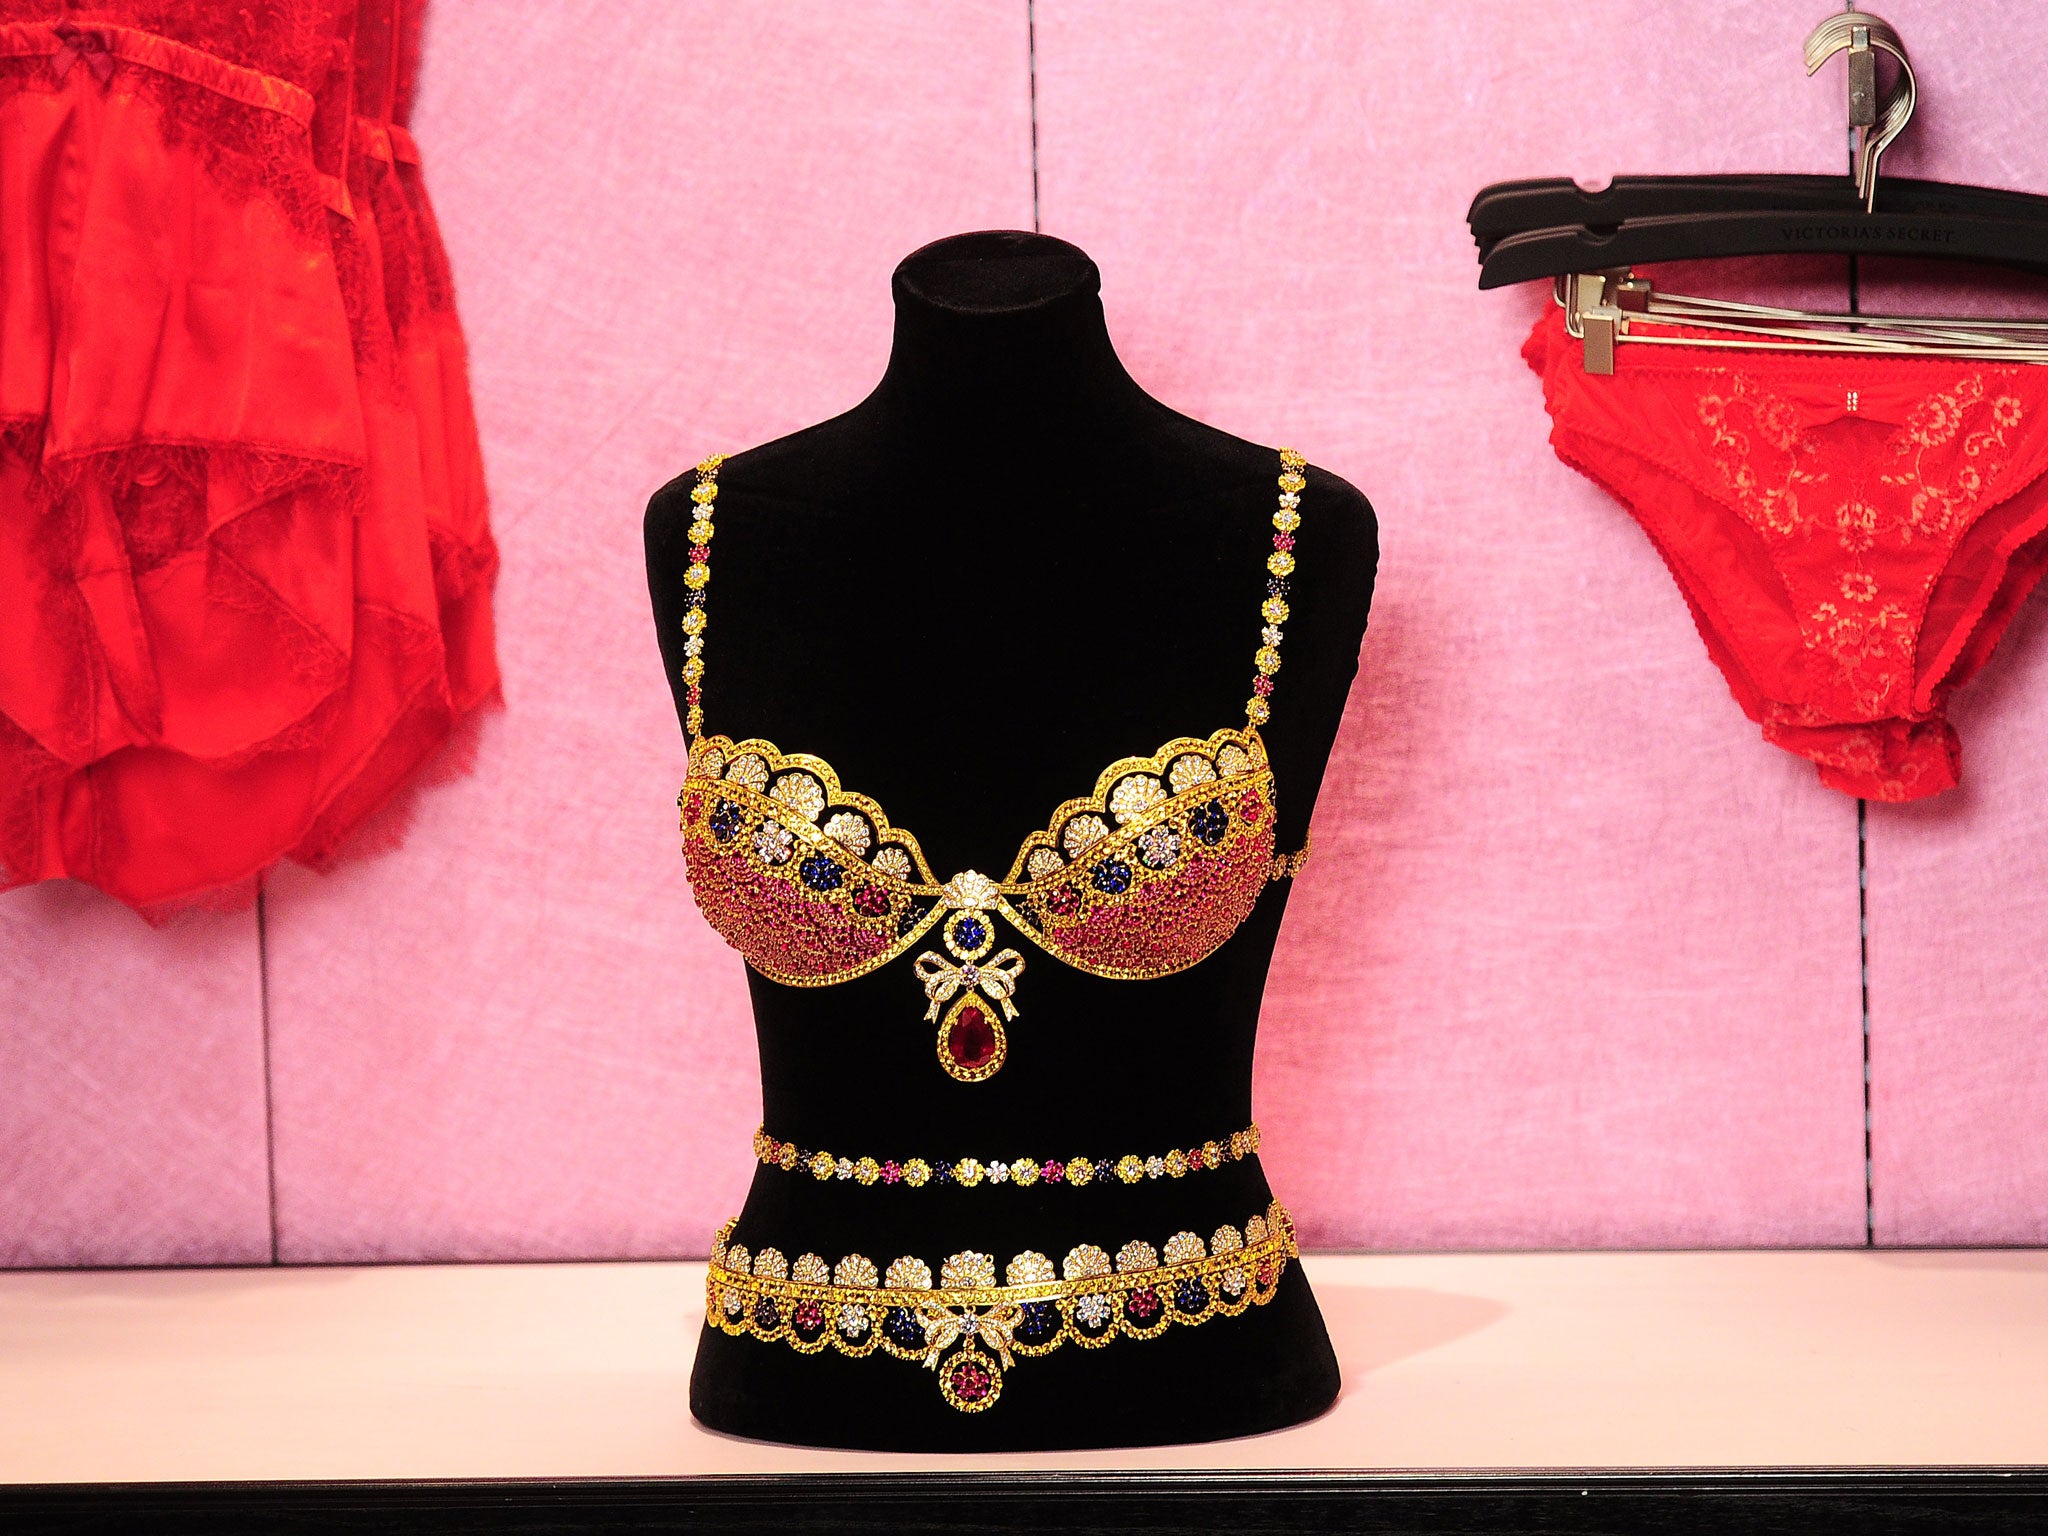 The Royal Fantasy Bra Gift Set includes a custom Dream Angels Demi silhouette bra and matching belt adorned with over 4,200 precious gems handset with rubies, diamonds, blue and yellow sapphires all set in 18 karat gold.